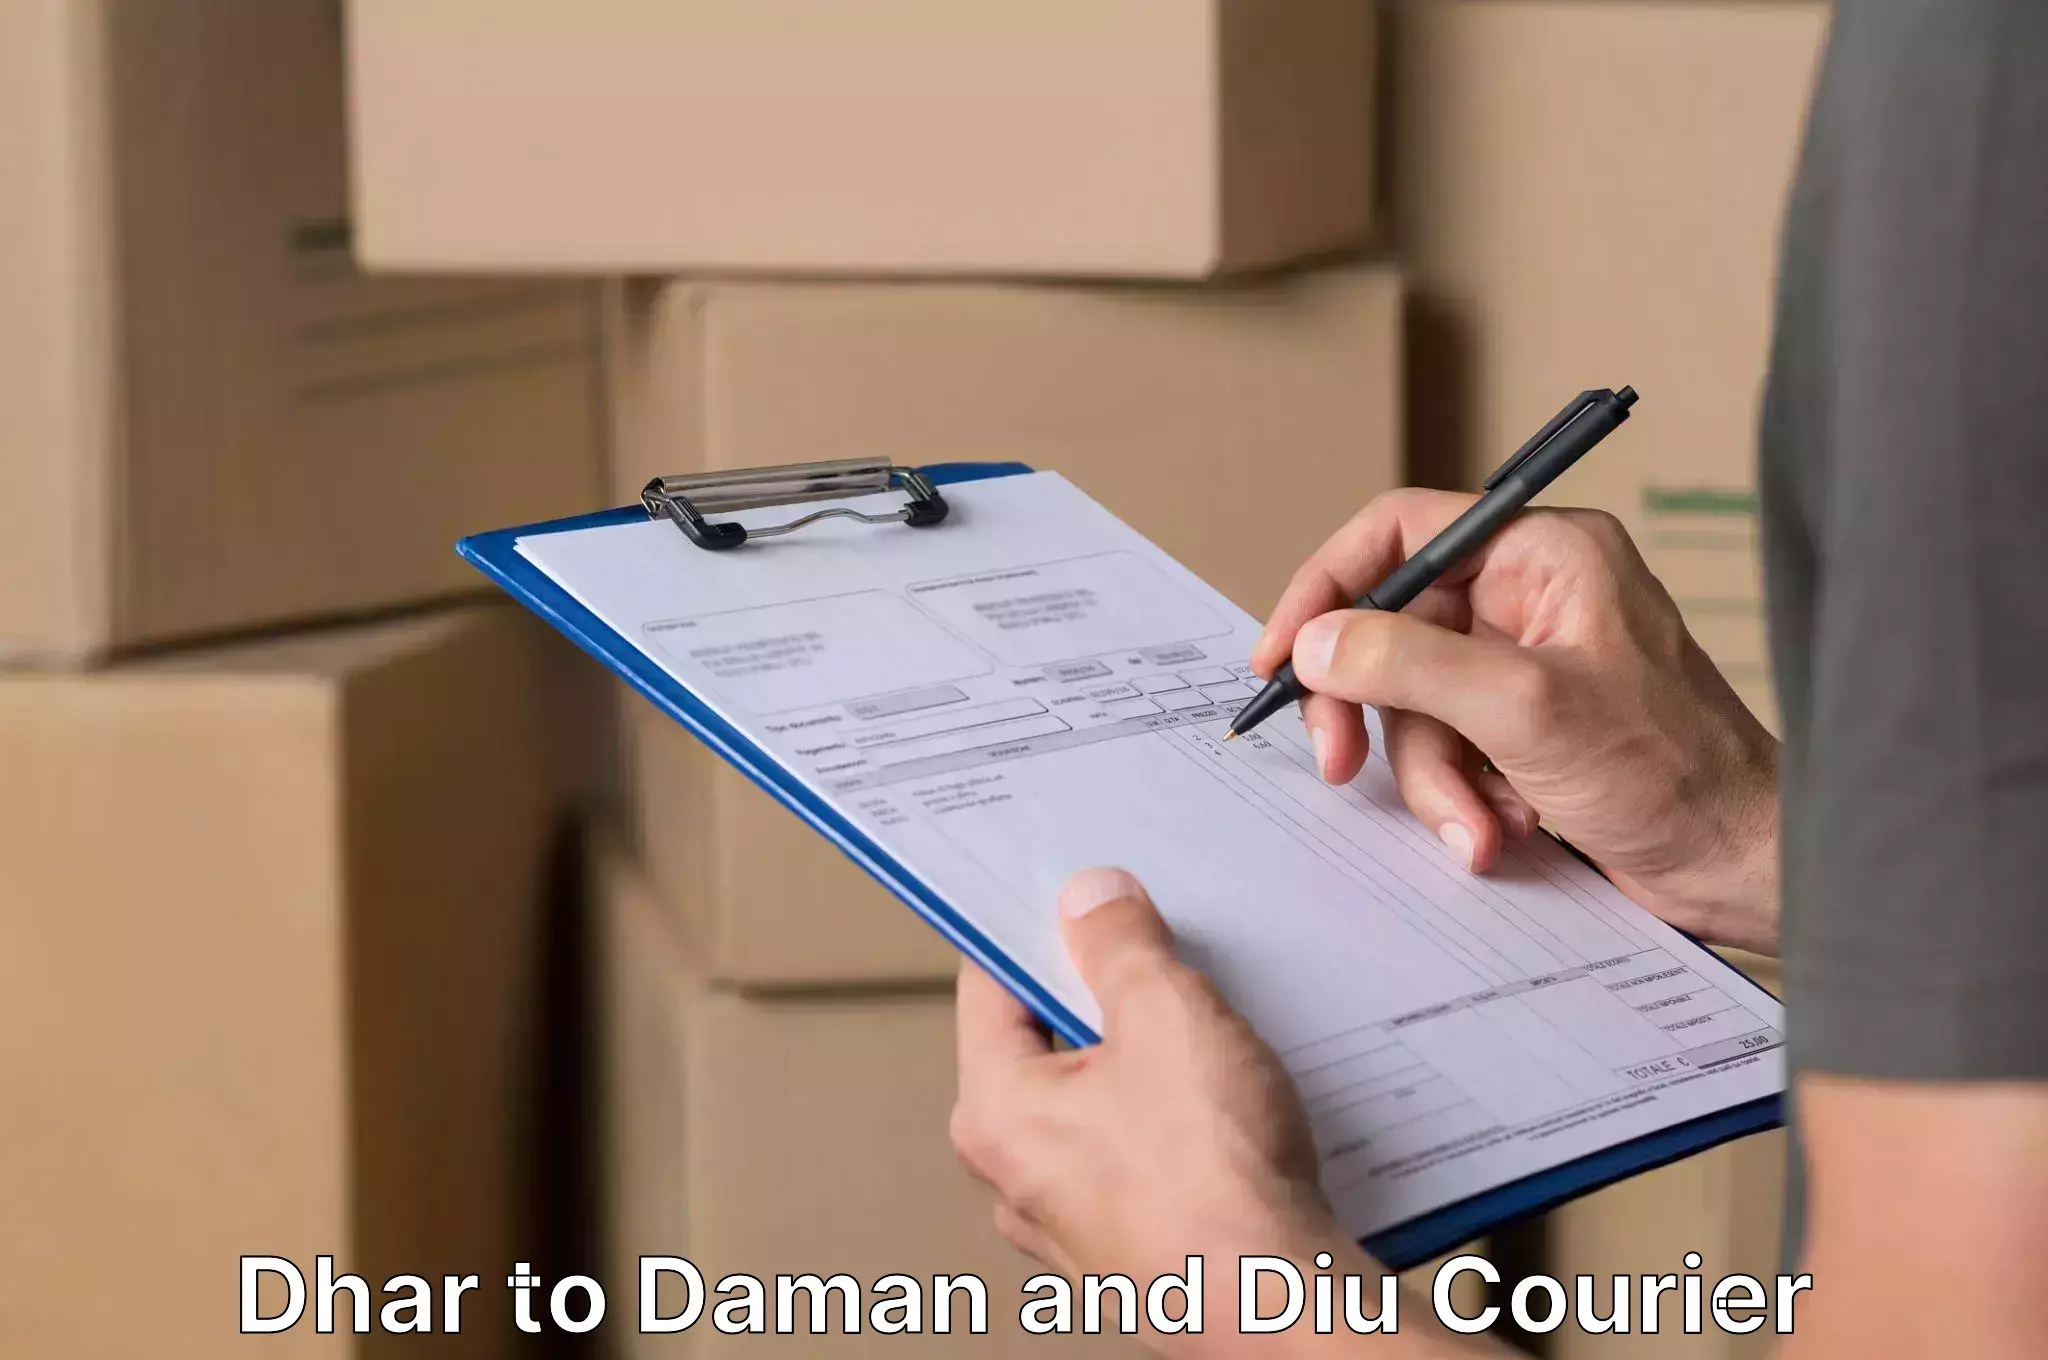 Moving service excellence Dhar to Daman and Diu